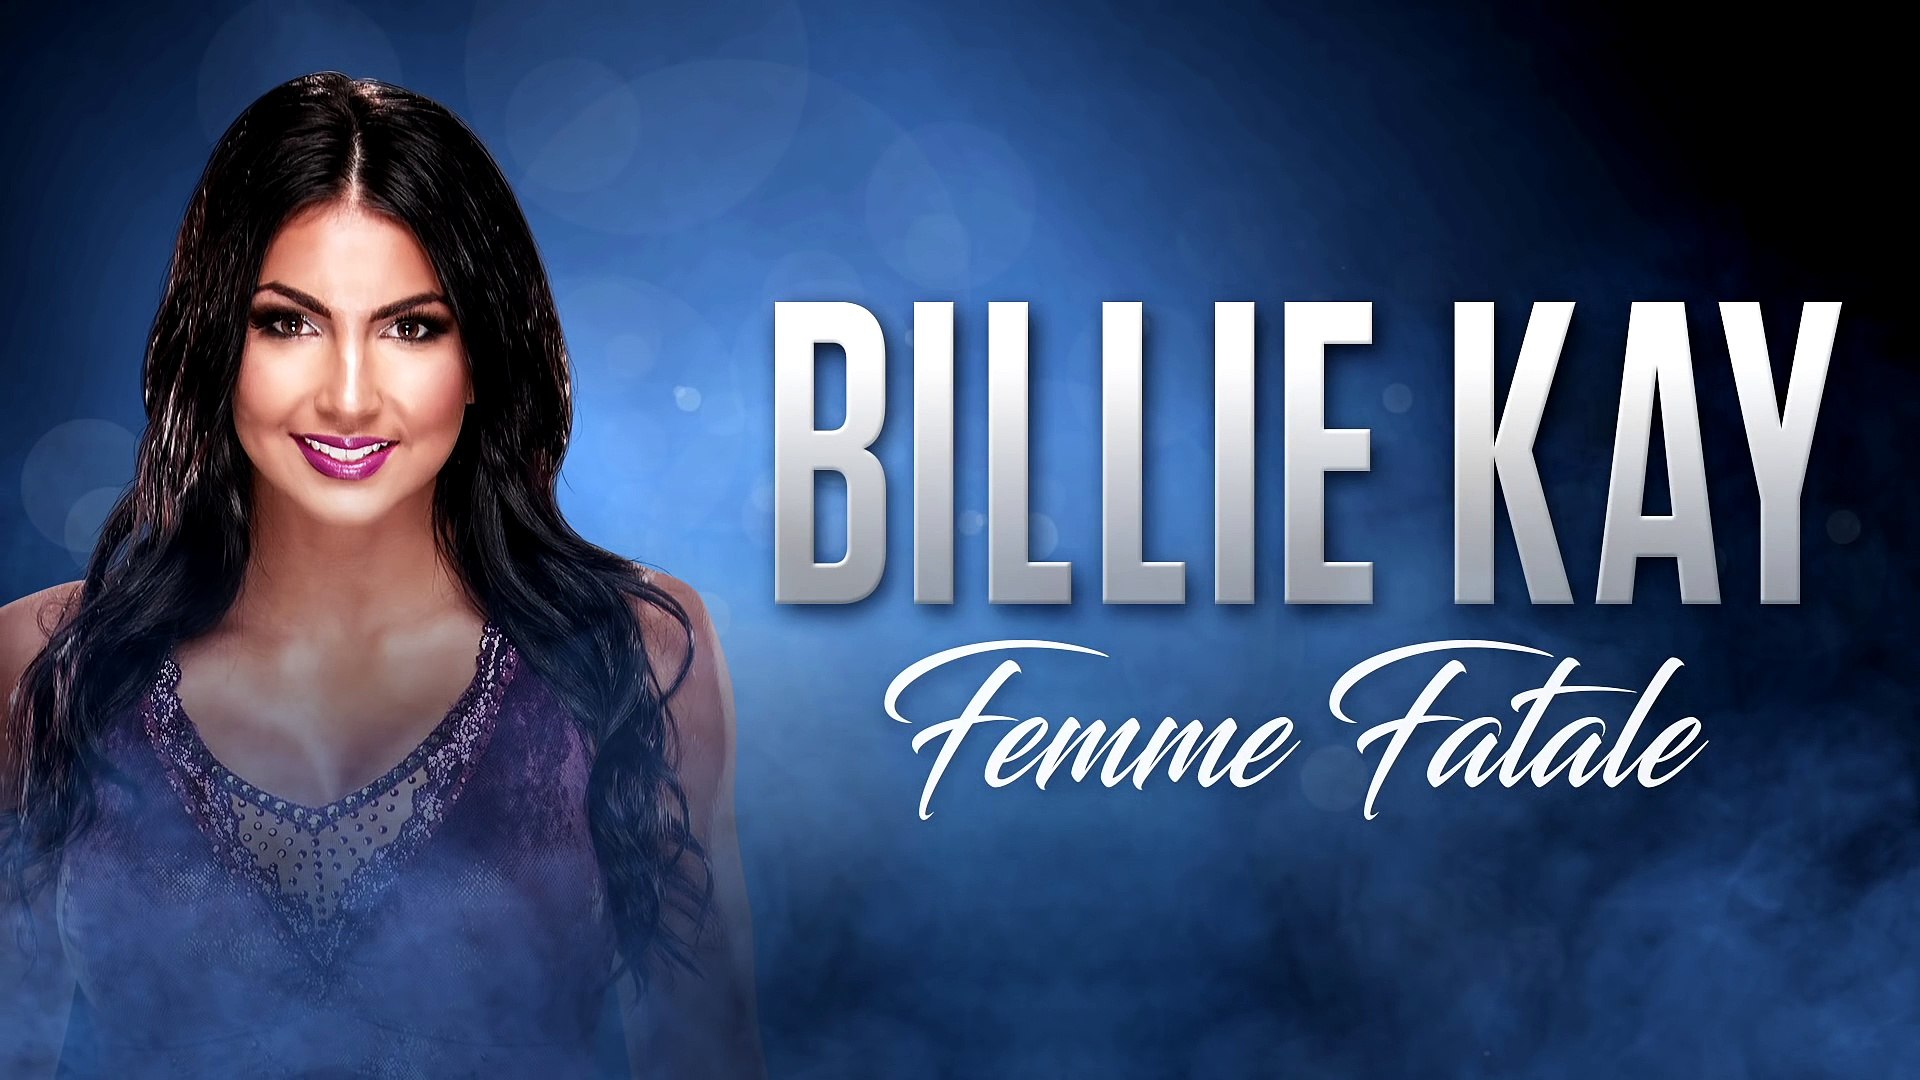 Billie Kay Femme Fatale Official Theme Video Dailymotion